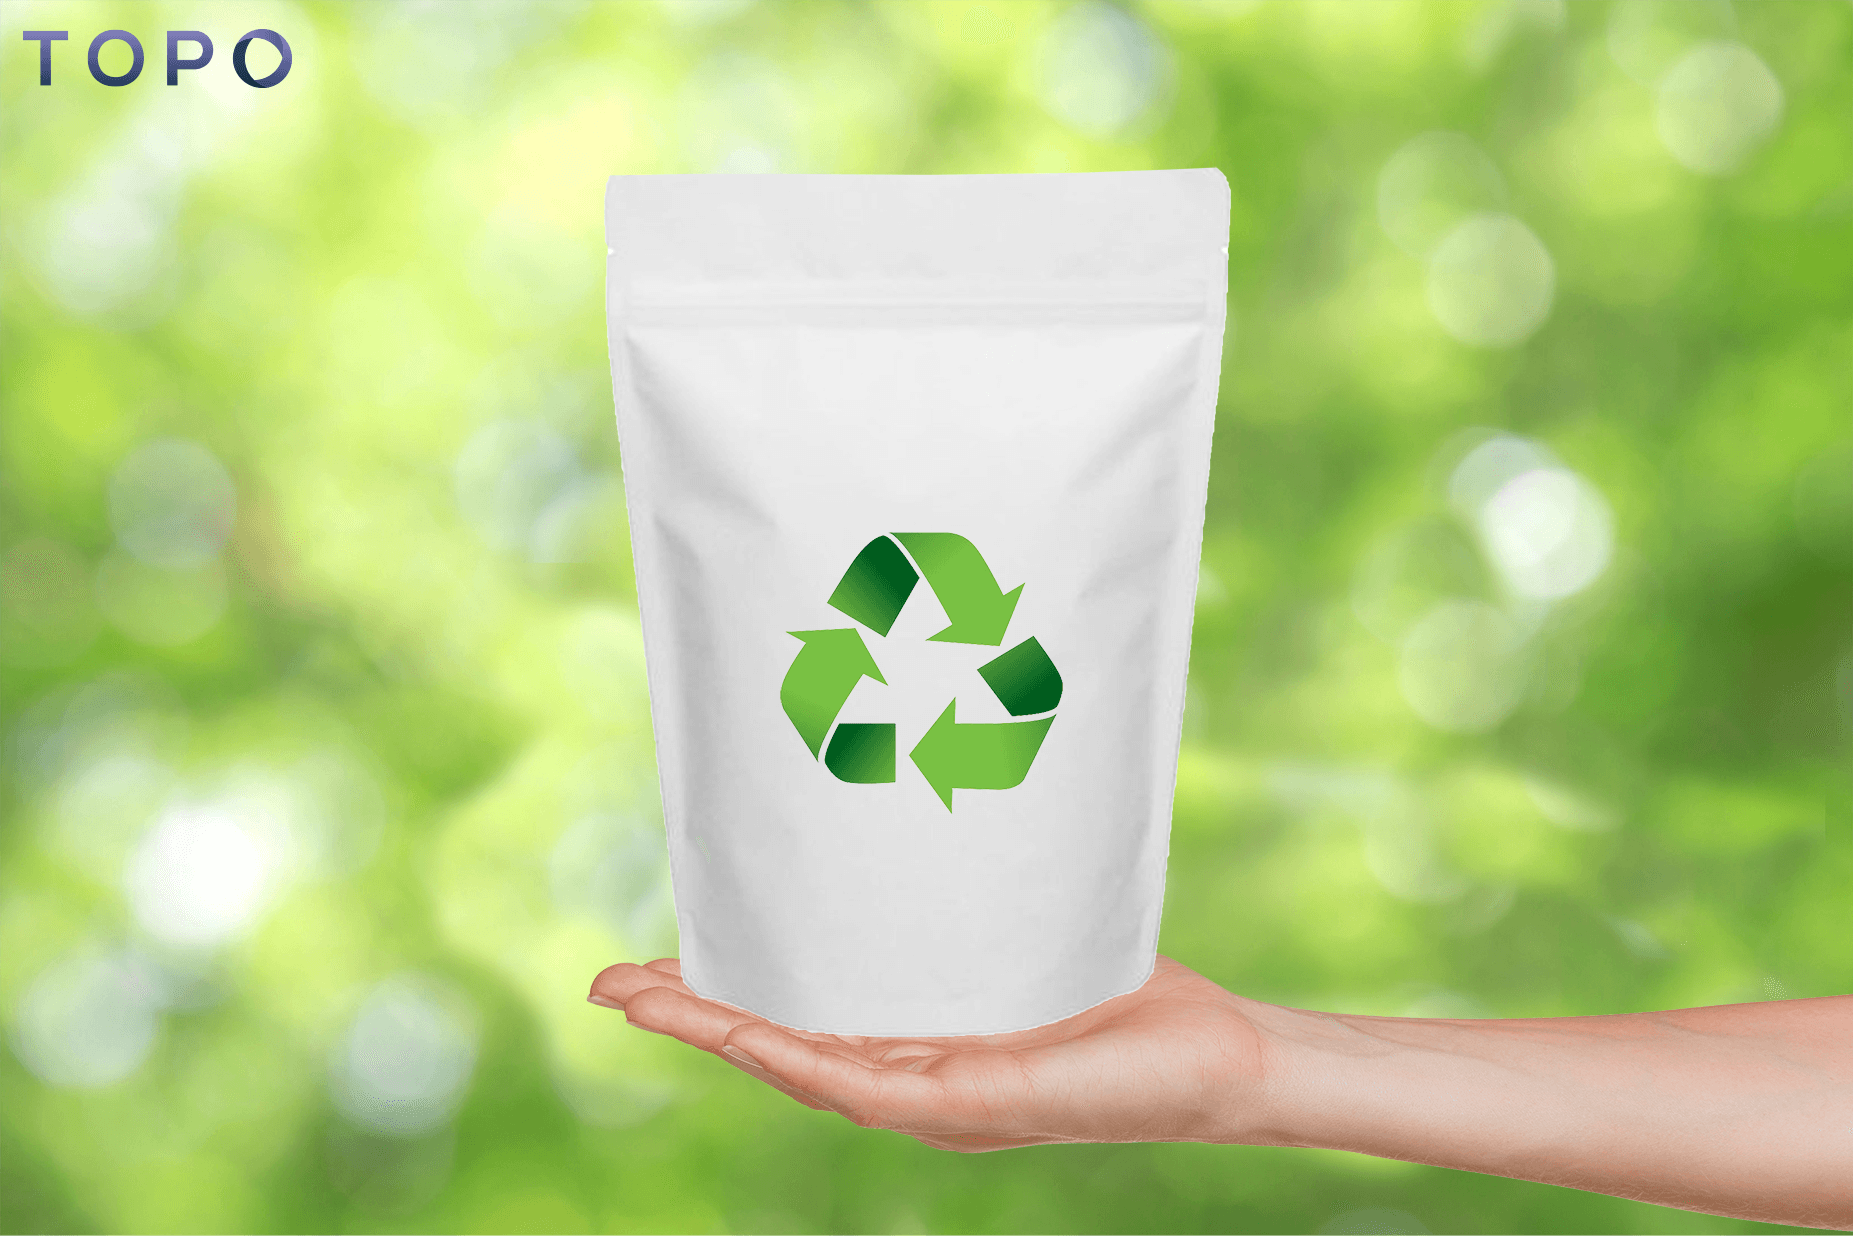 Flexible Packaging, the Circular Economy, and Supply Chain Sustainability